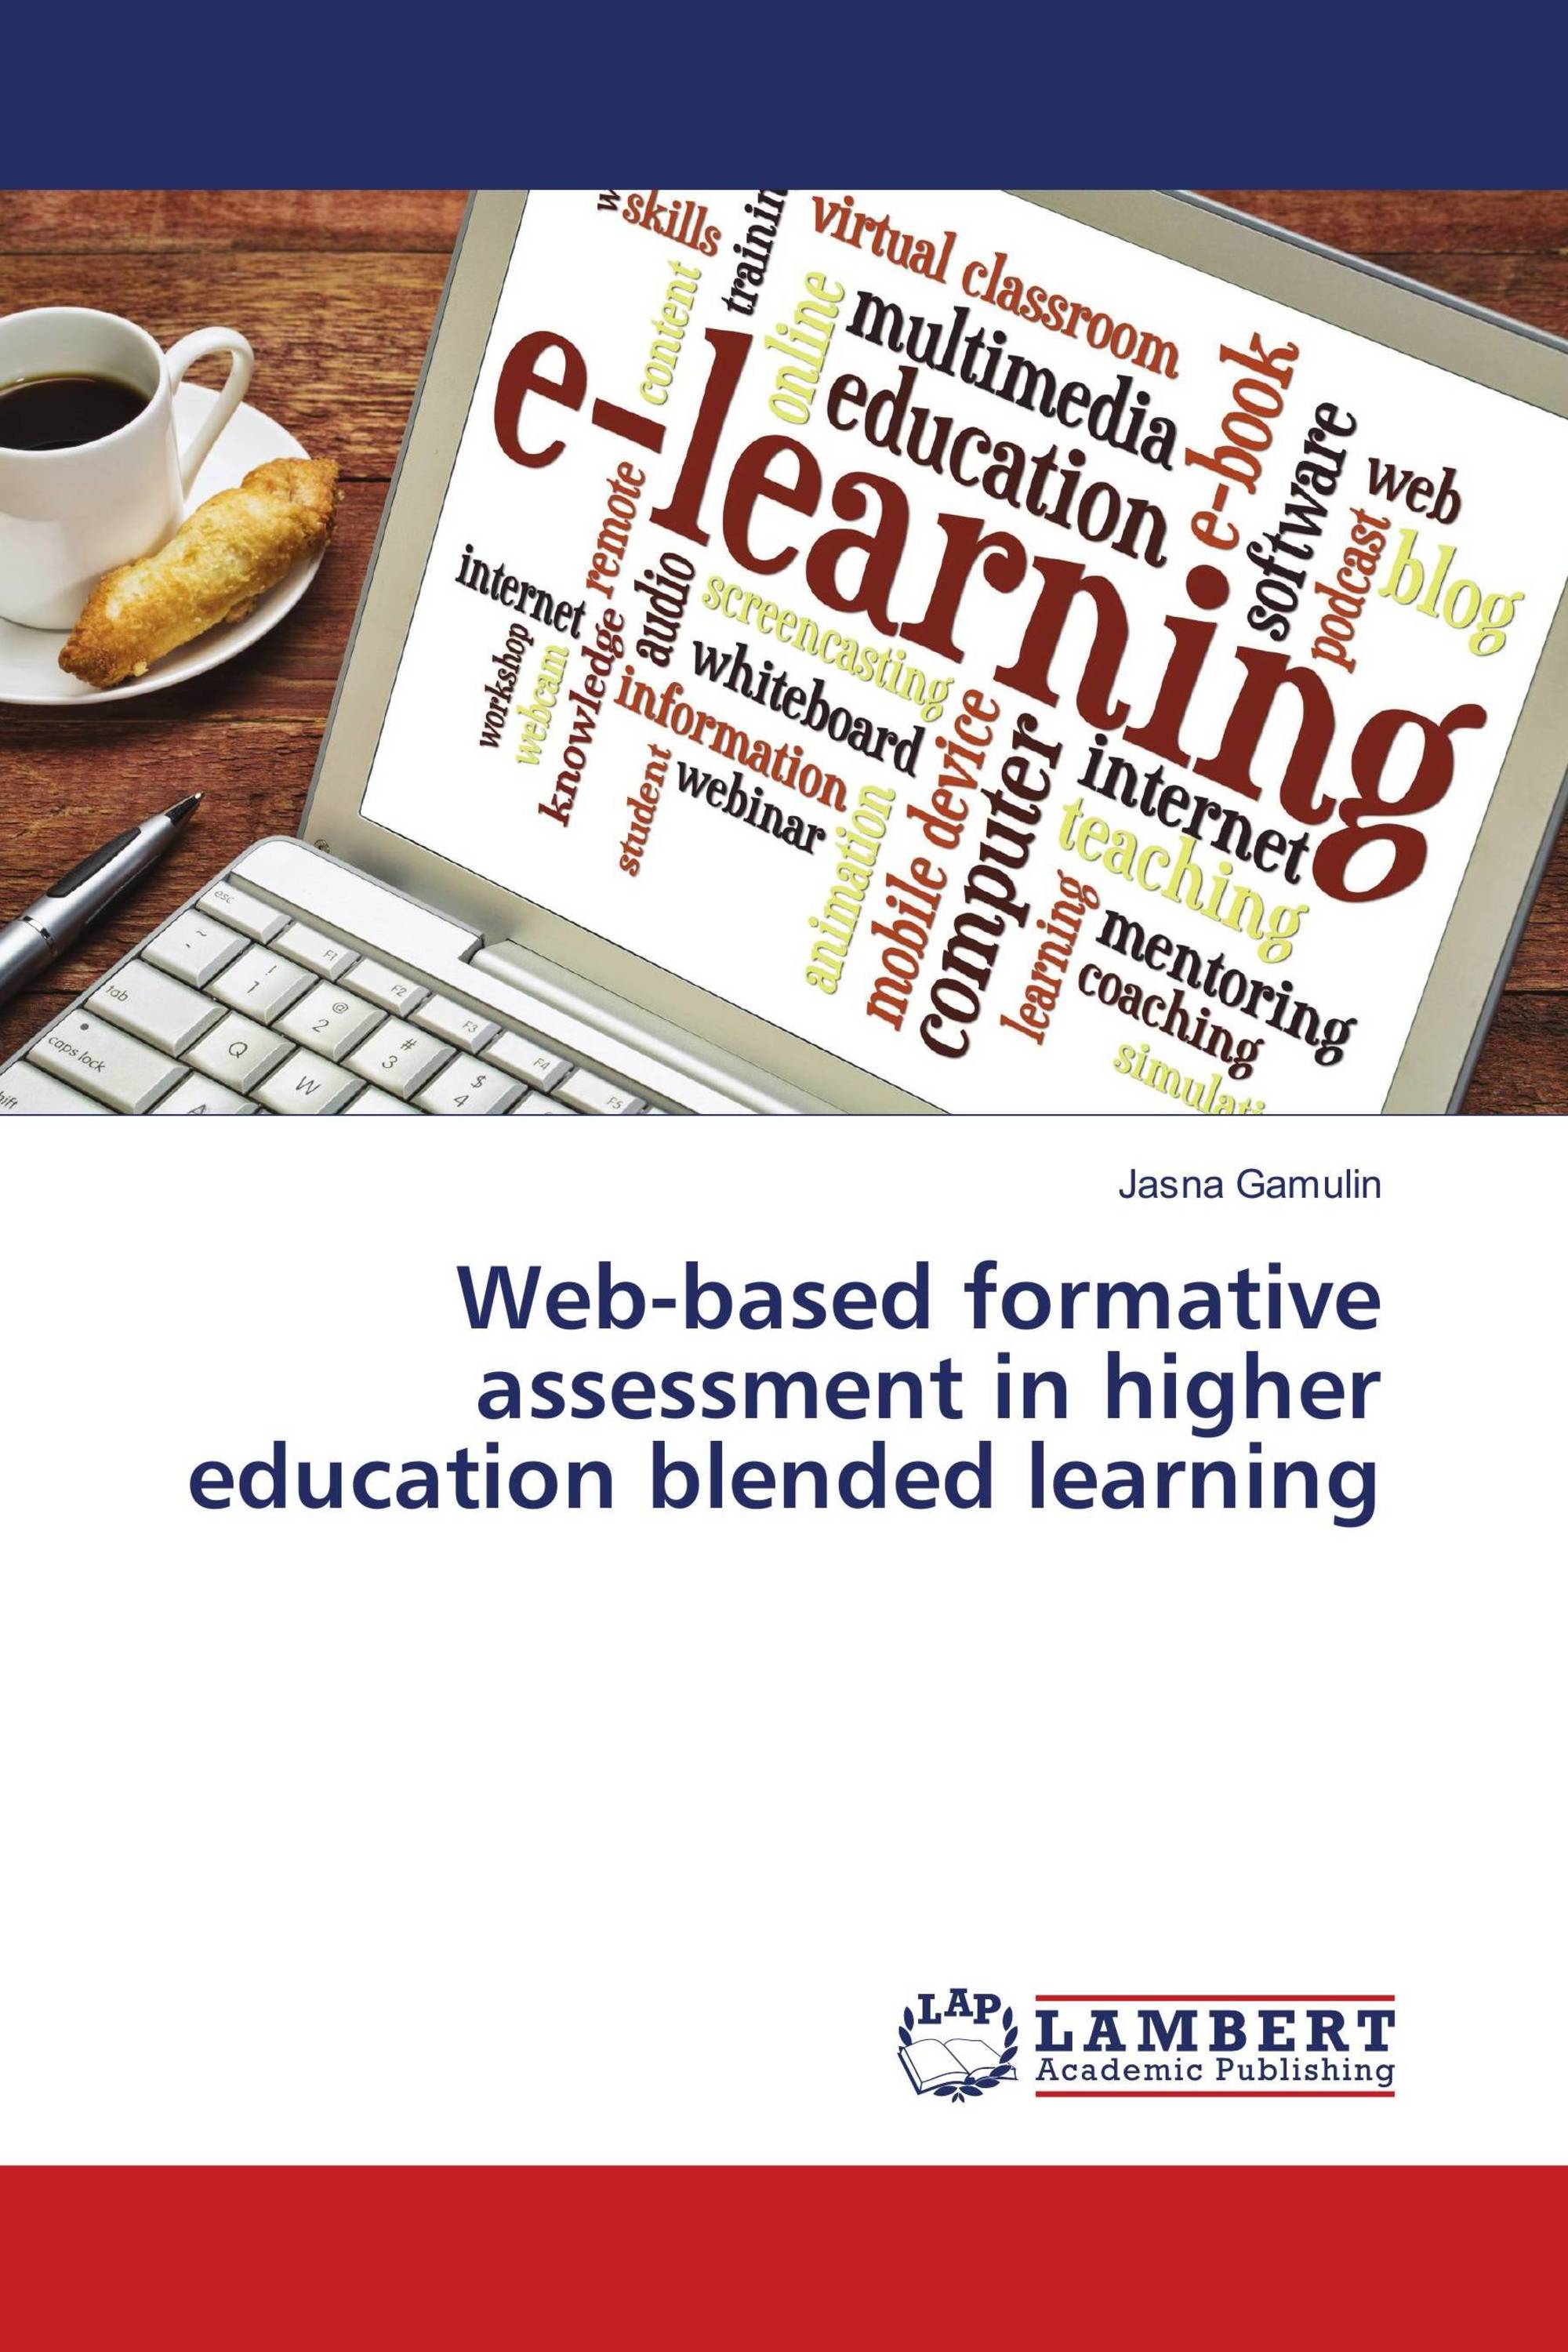 online formative assessment in higher education